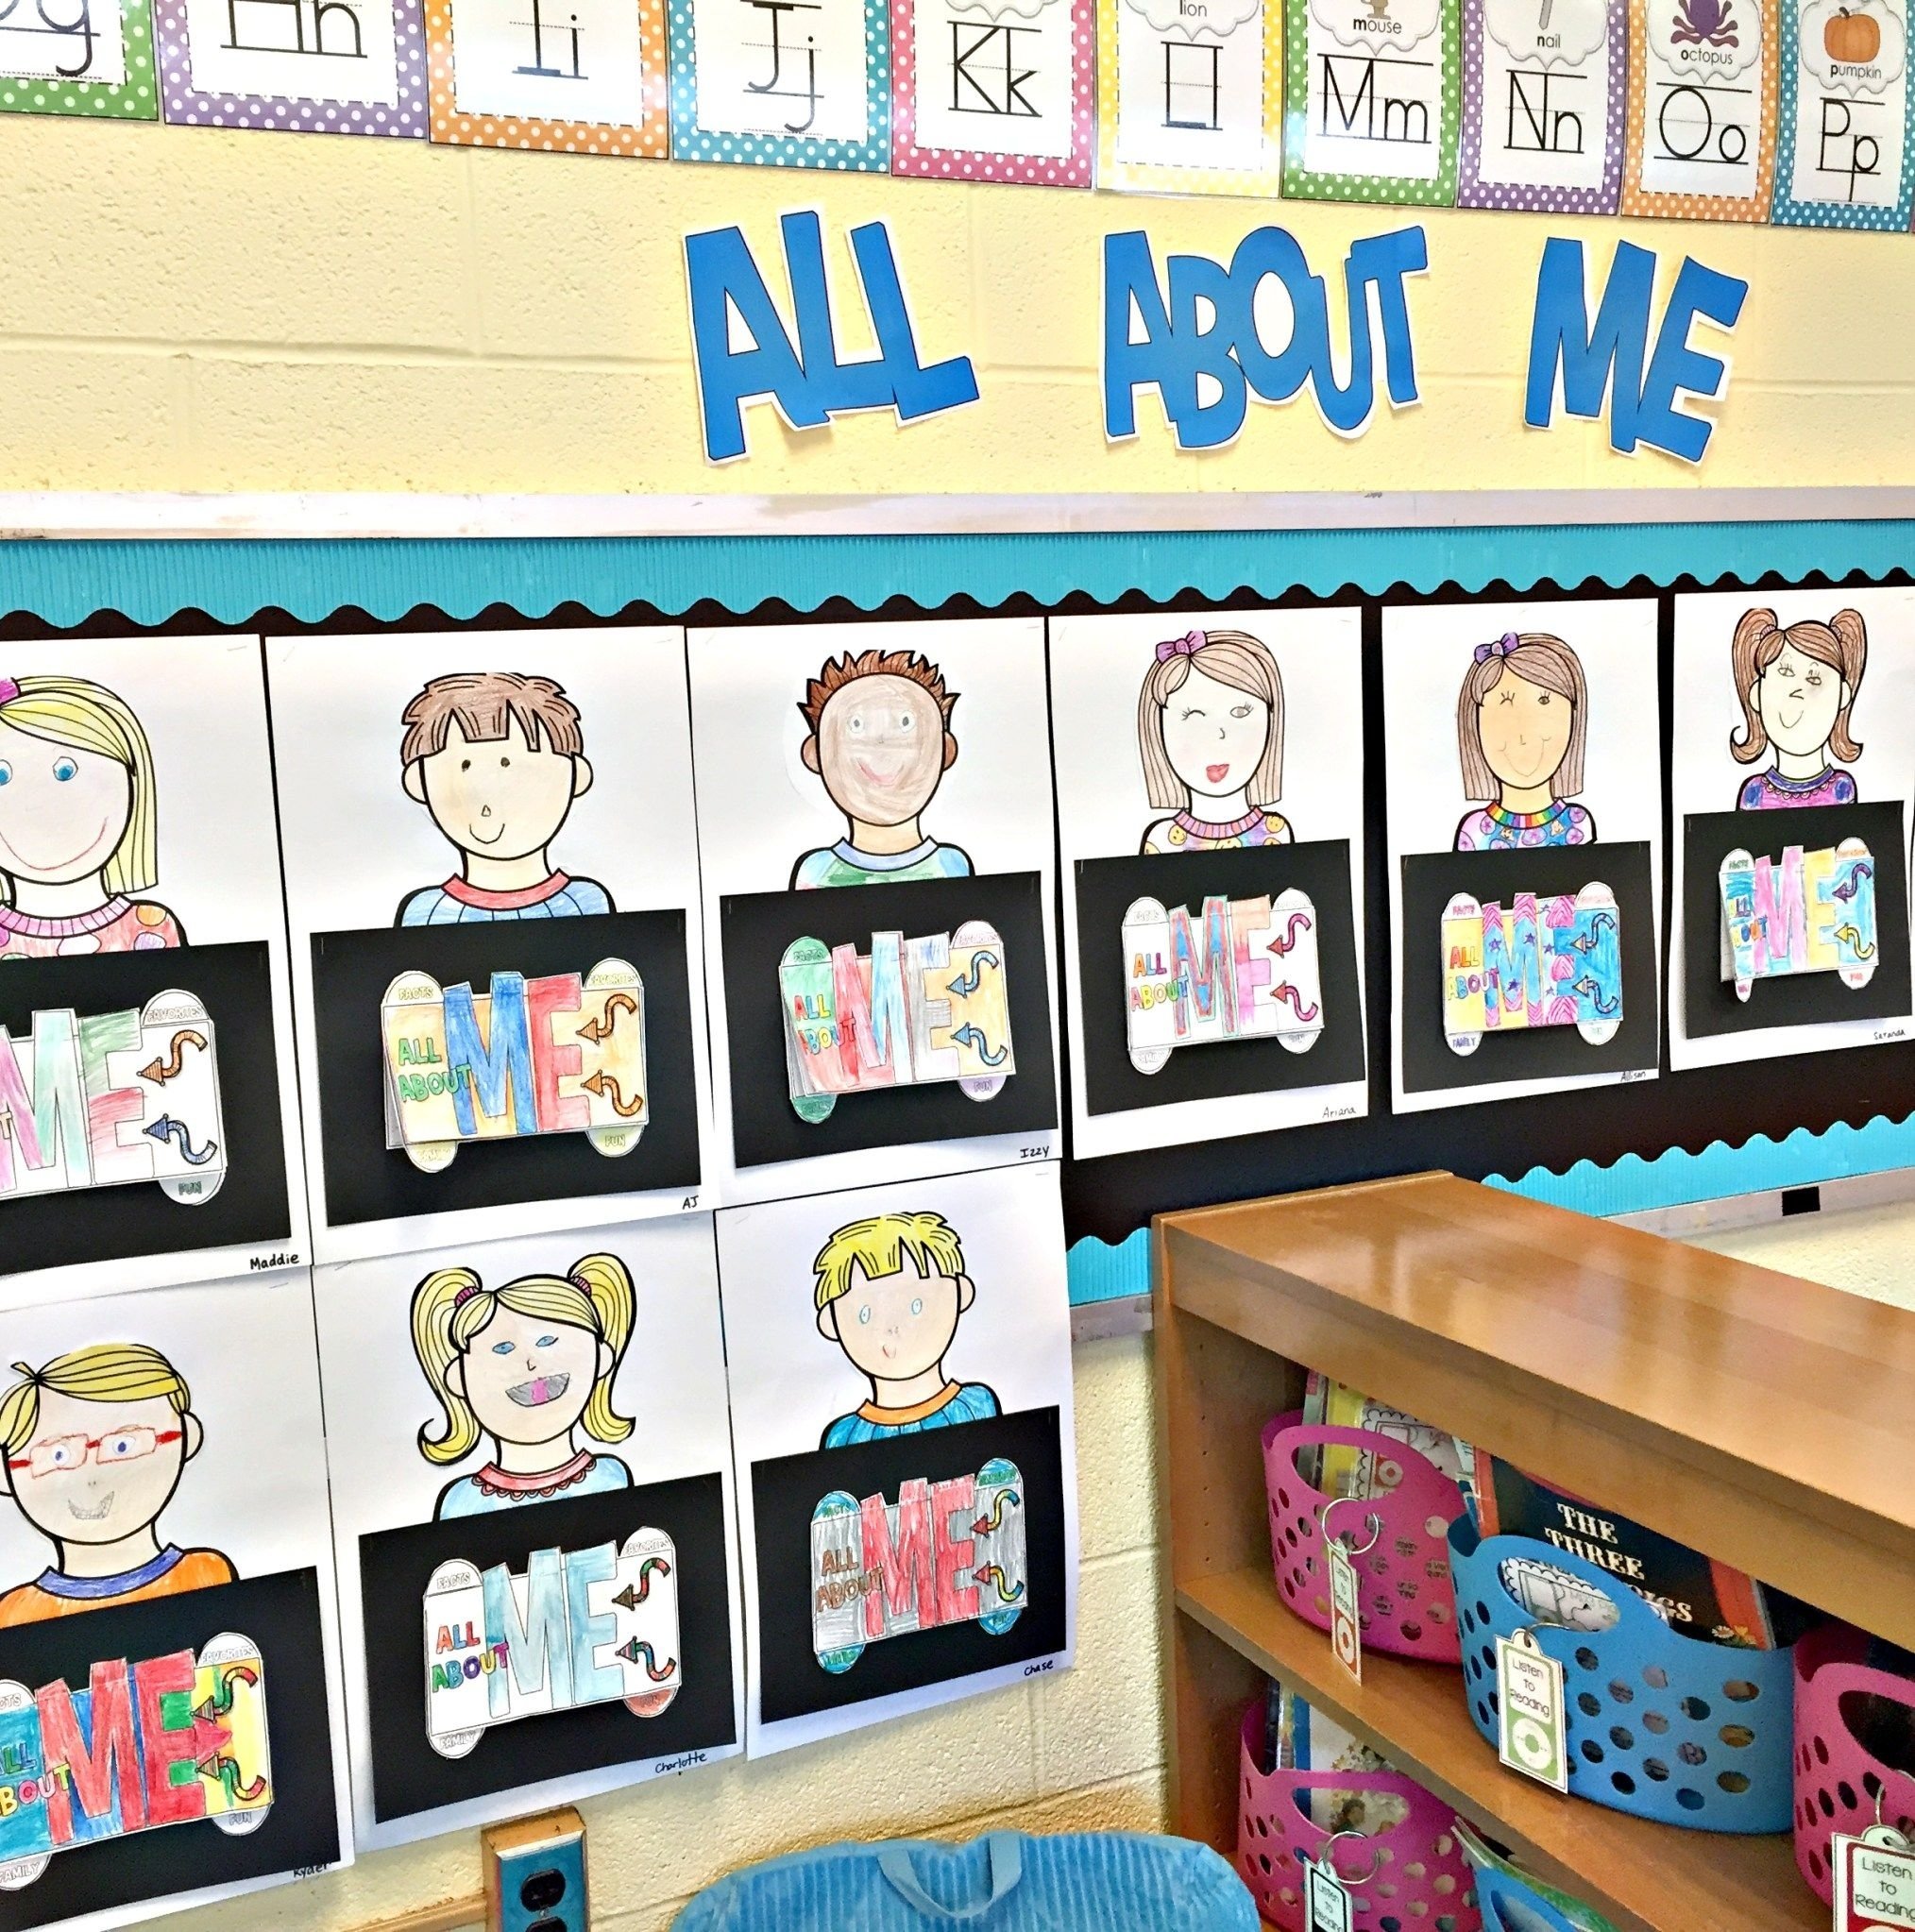 10 Most Recommended All About Me Project Ideas all about me project back to school bulletin board display 2022